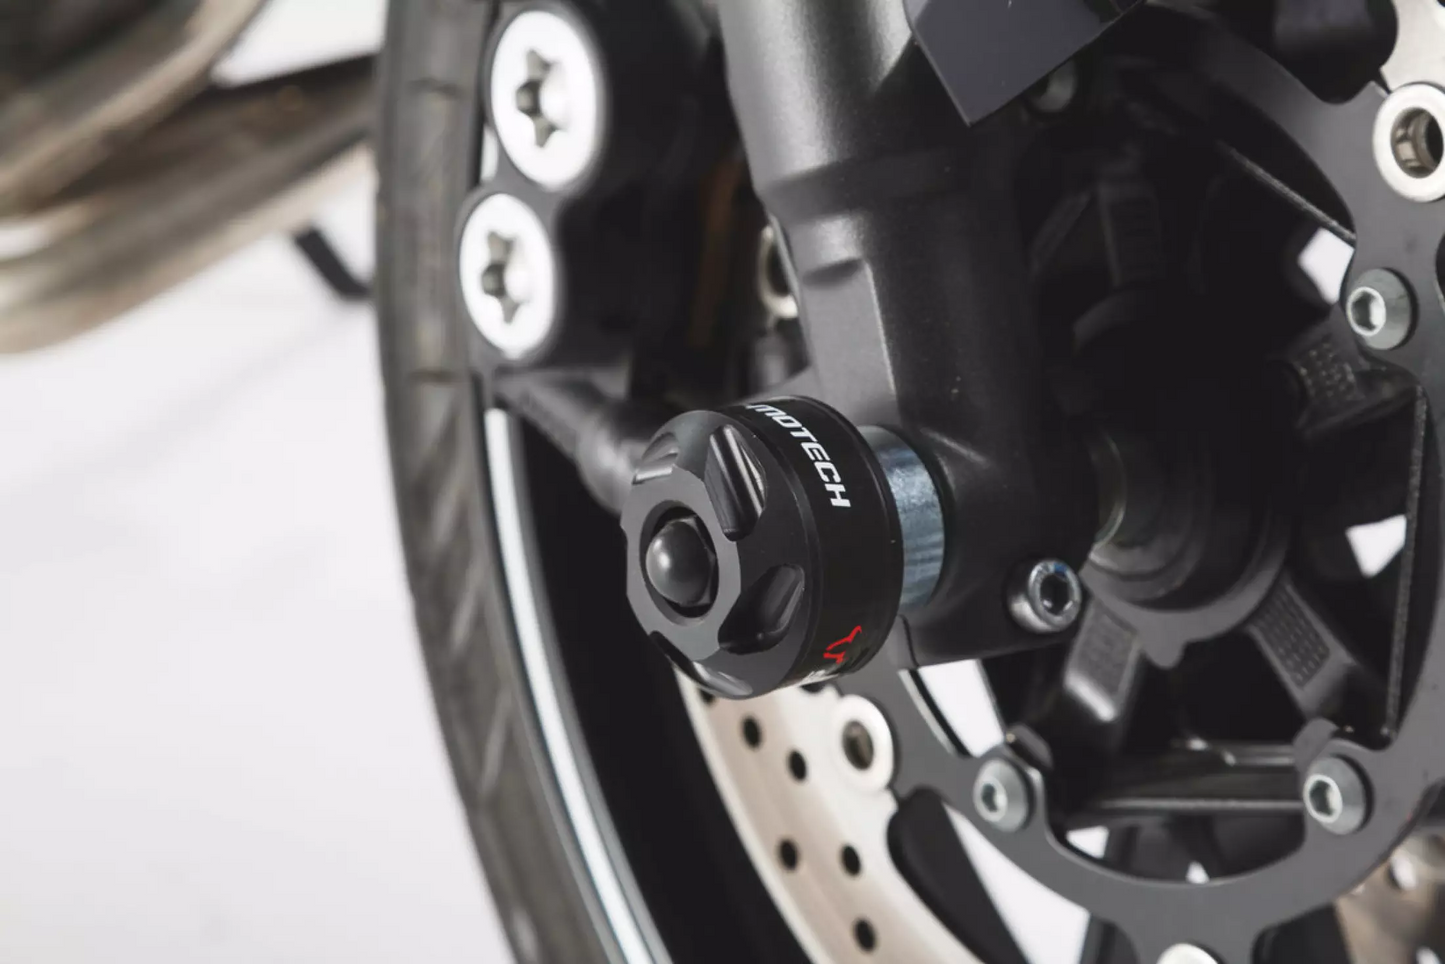 SW Motech Slider Set (Front Axle Black) fits for Kawasaki Versys 650 ('07-'09) / ('15-) - Durian Bikers